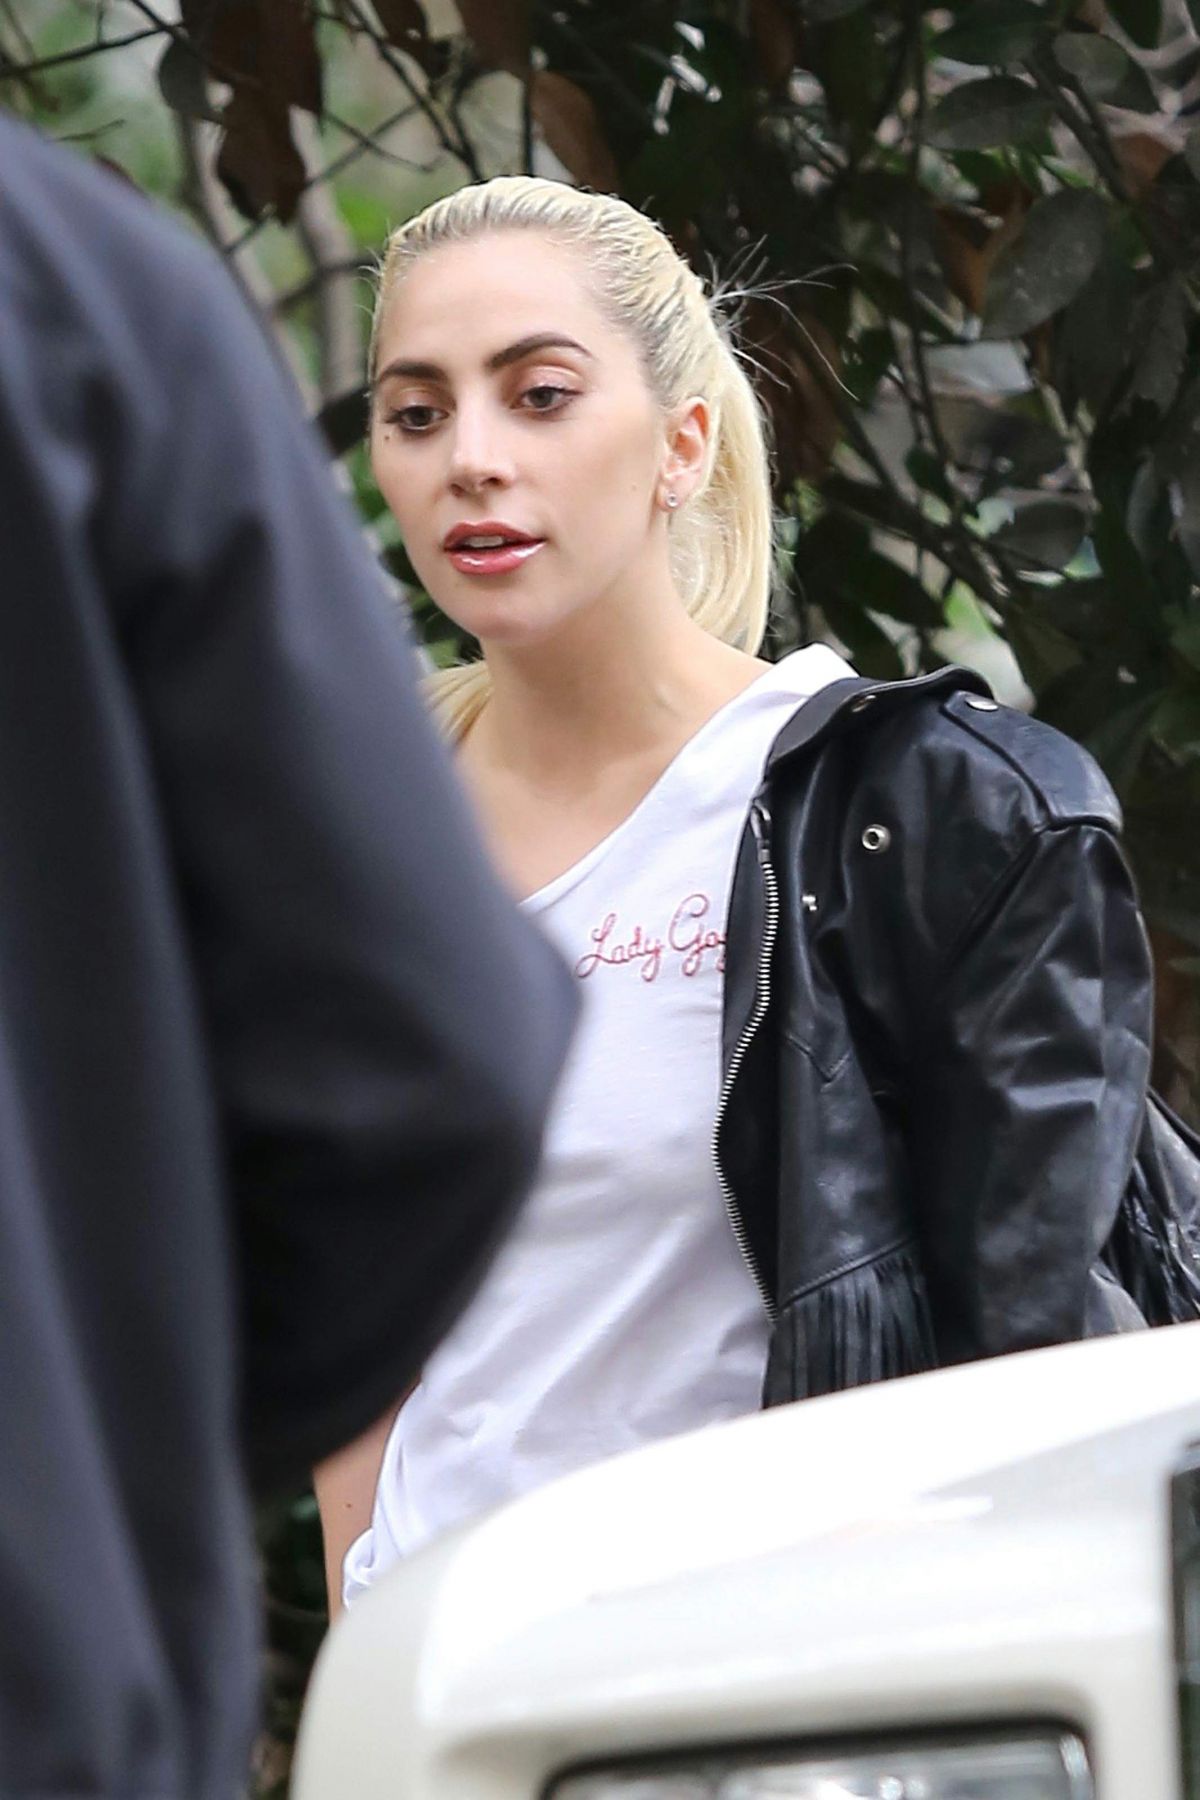 LADY GAGA at Bradley Cooper’s House in Brentwood 12/10/2016 – HawtCelebs1200 x 1800